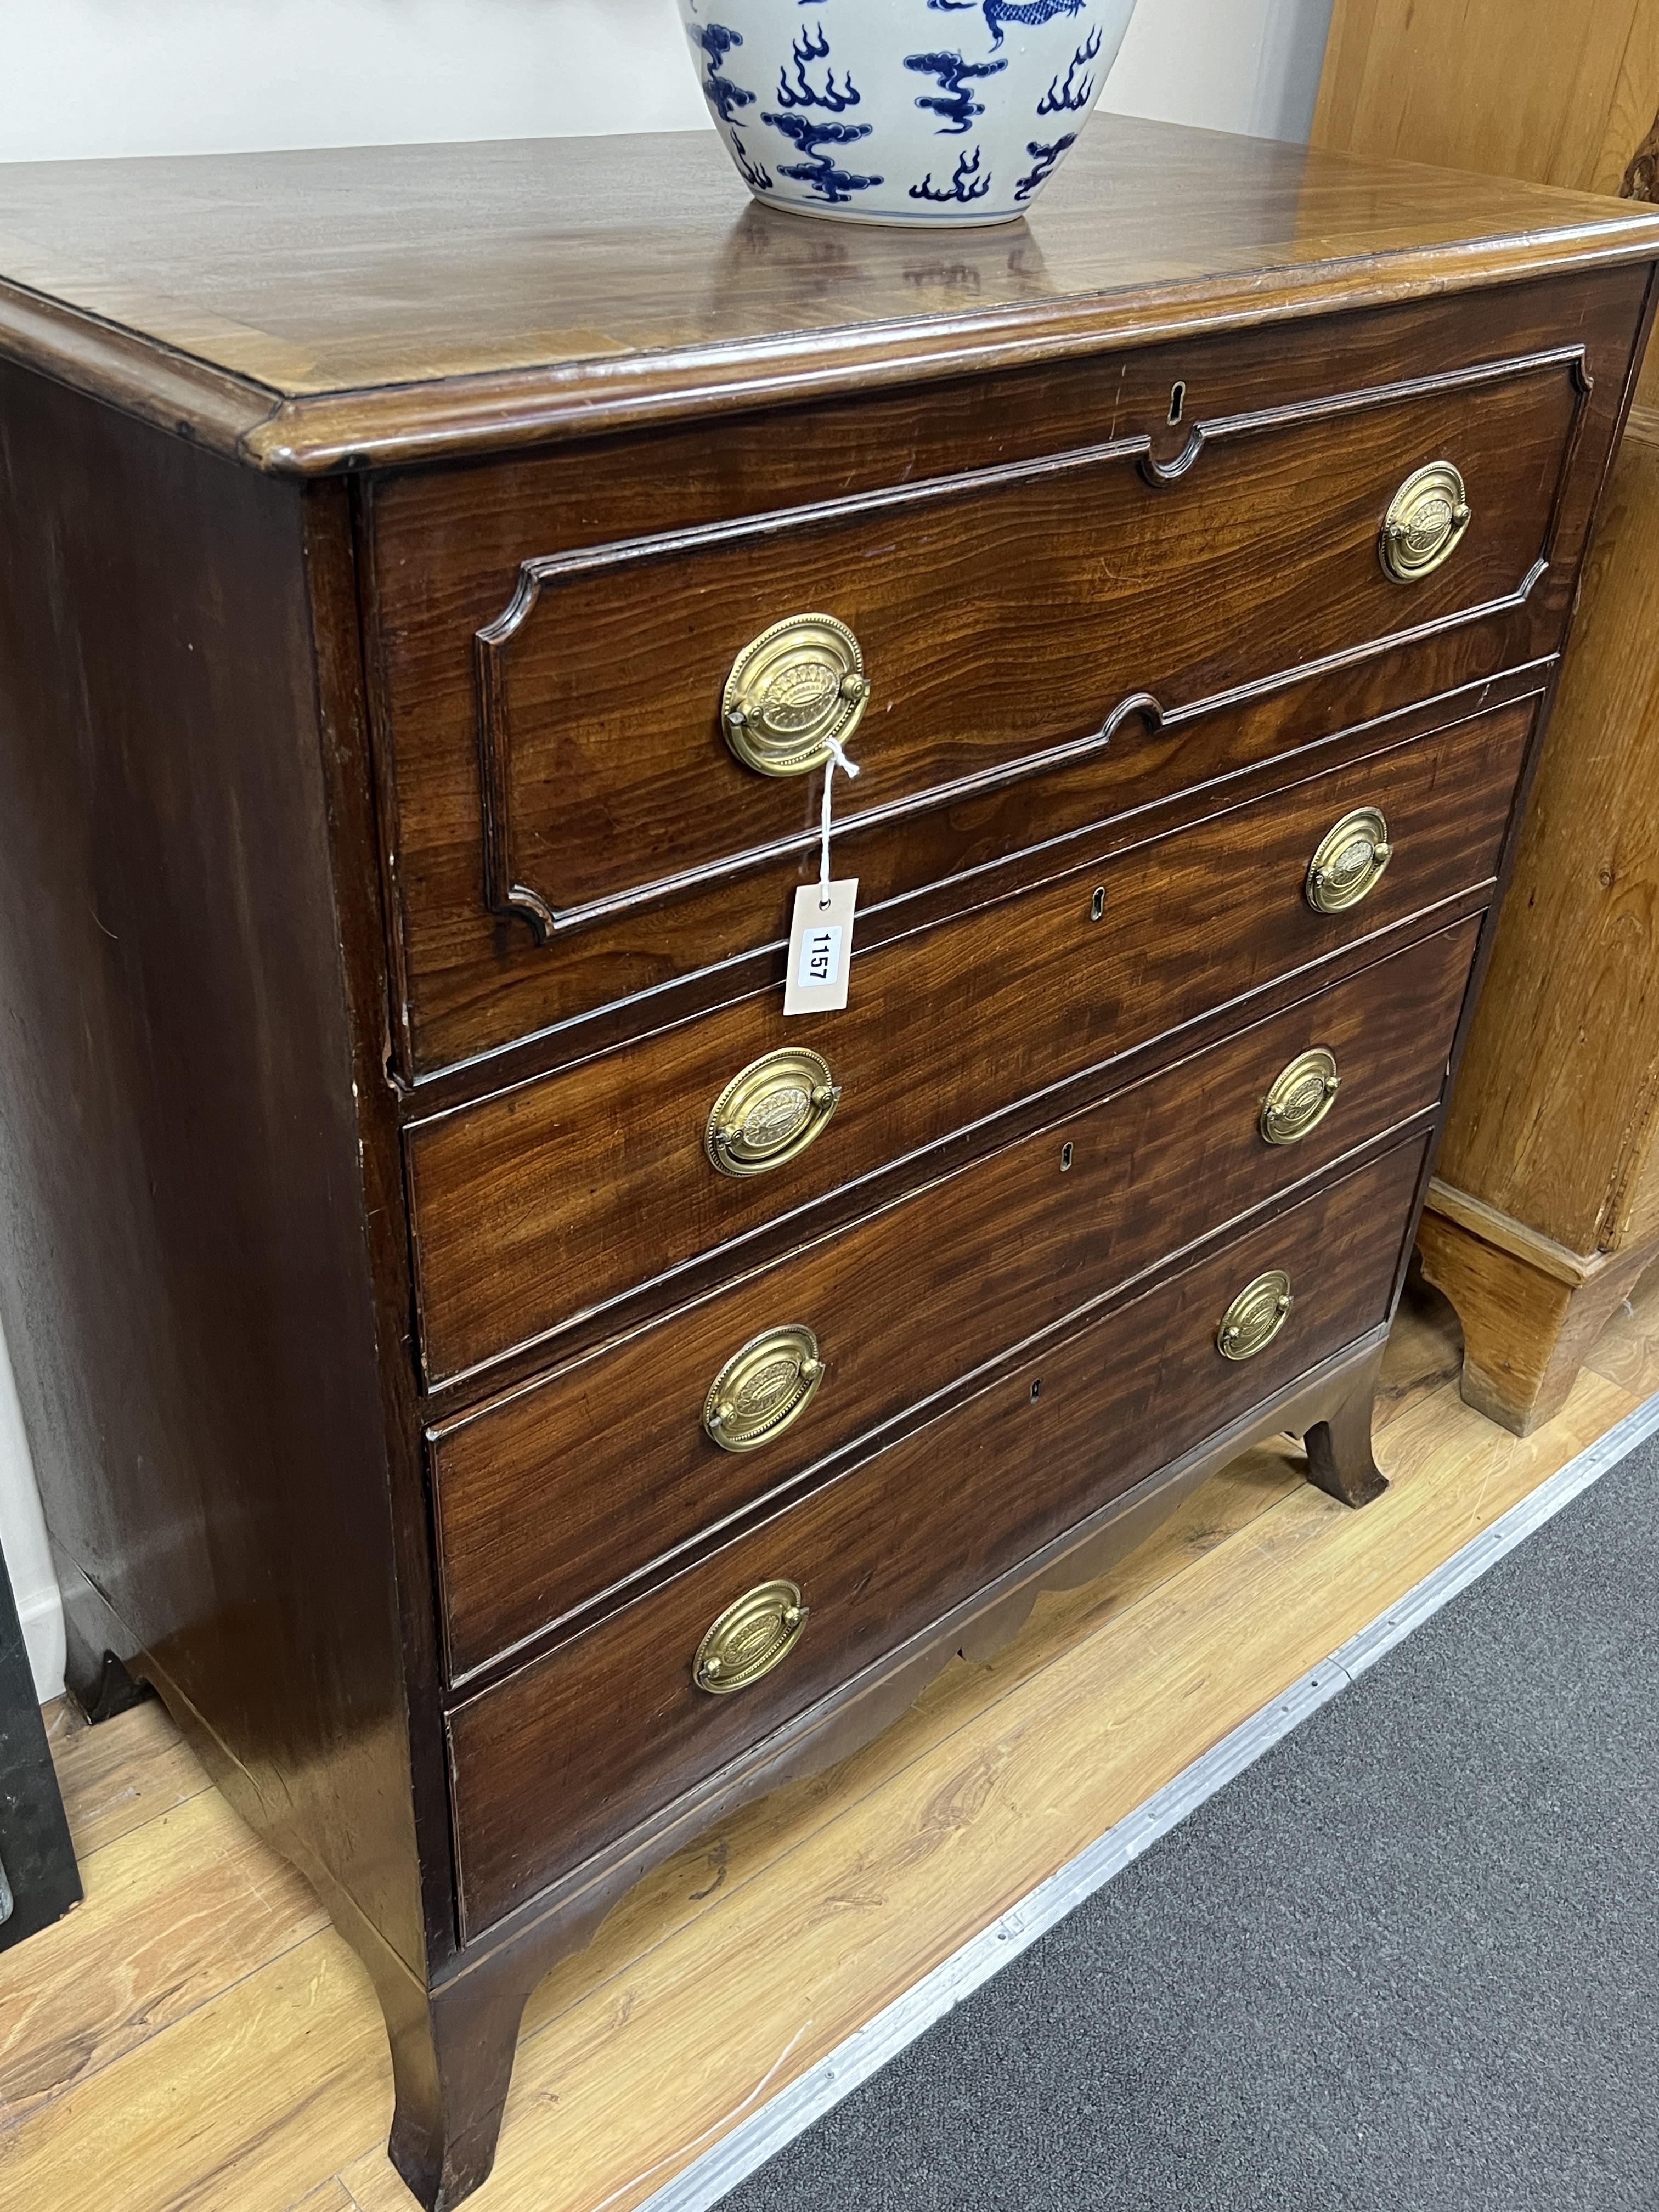 A George IV mahogany secretaire chest of drawers (modified), width 103cm, depth 52cm, height 108cm. Condition - fair